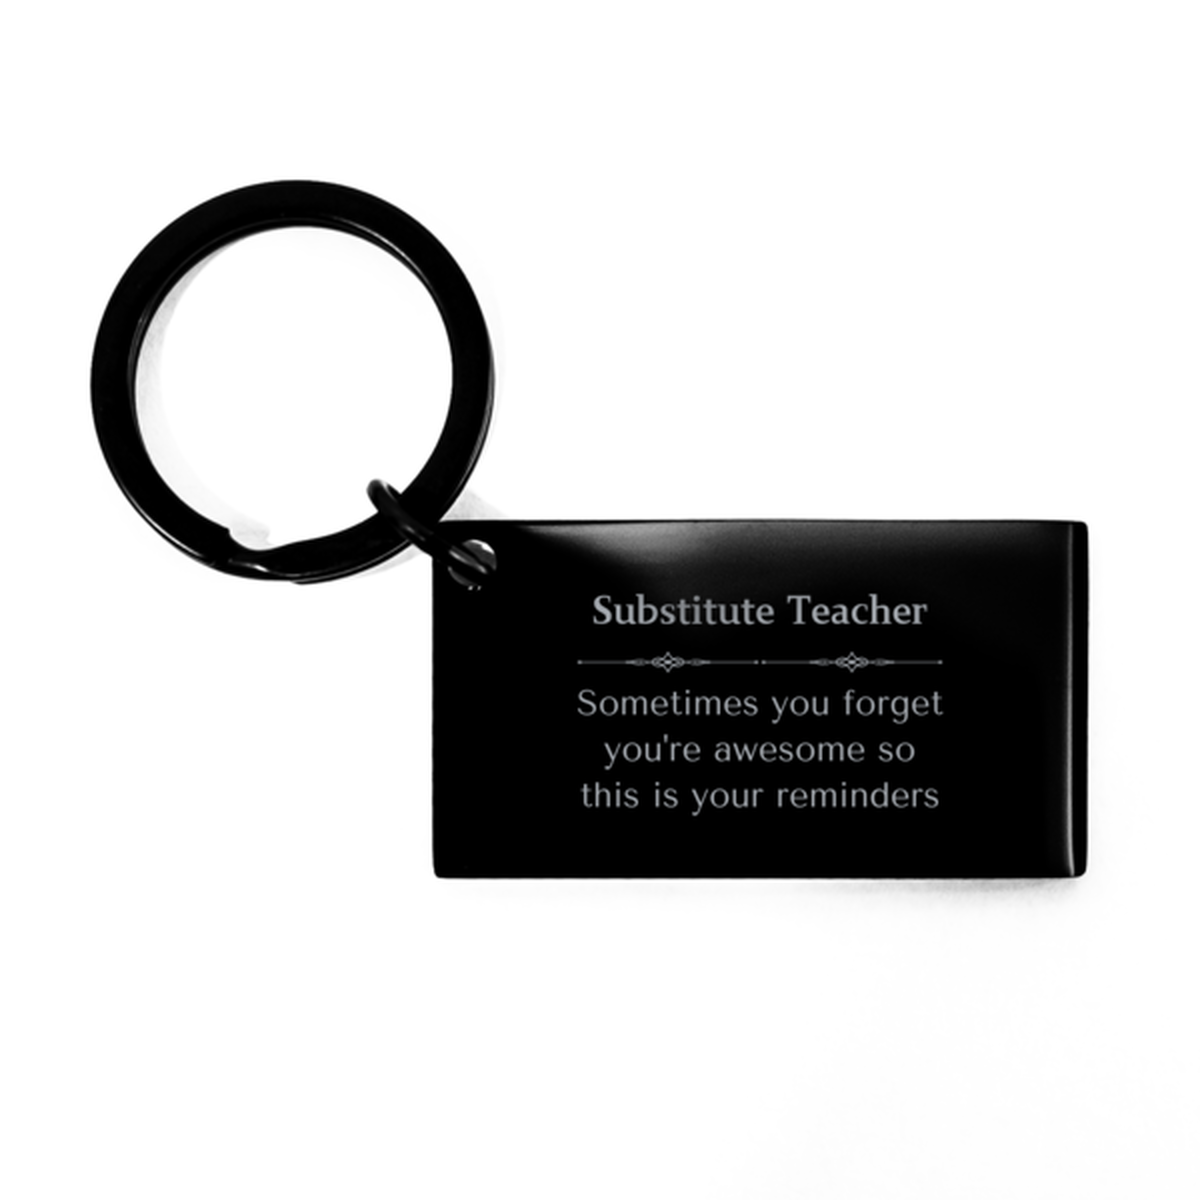 Sentimental Substitute Teacher Keychain, Warehouse Clerk Sometimes you forget you're awesome so this is your reminders, Graduation Christmas Birthday Gifts for Substitute Teacher, Men, Women, Coworkers